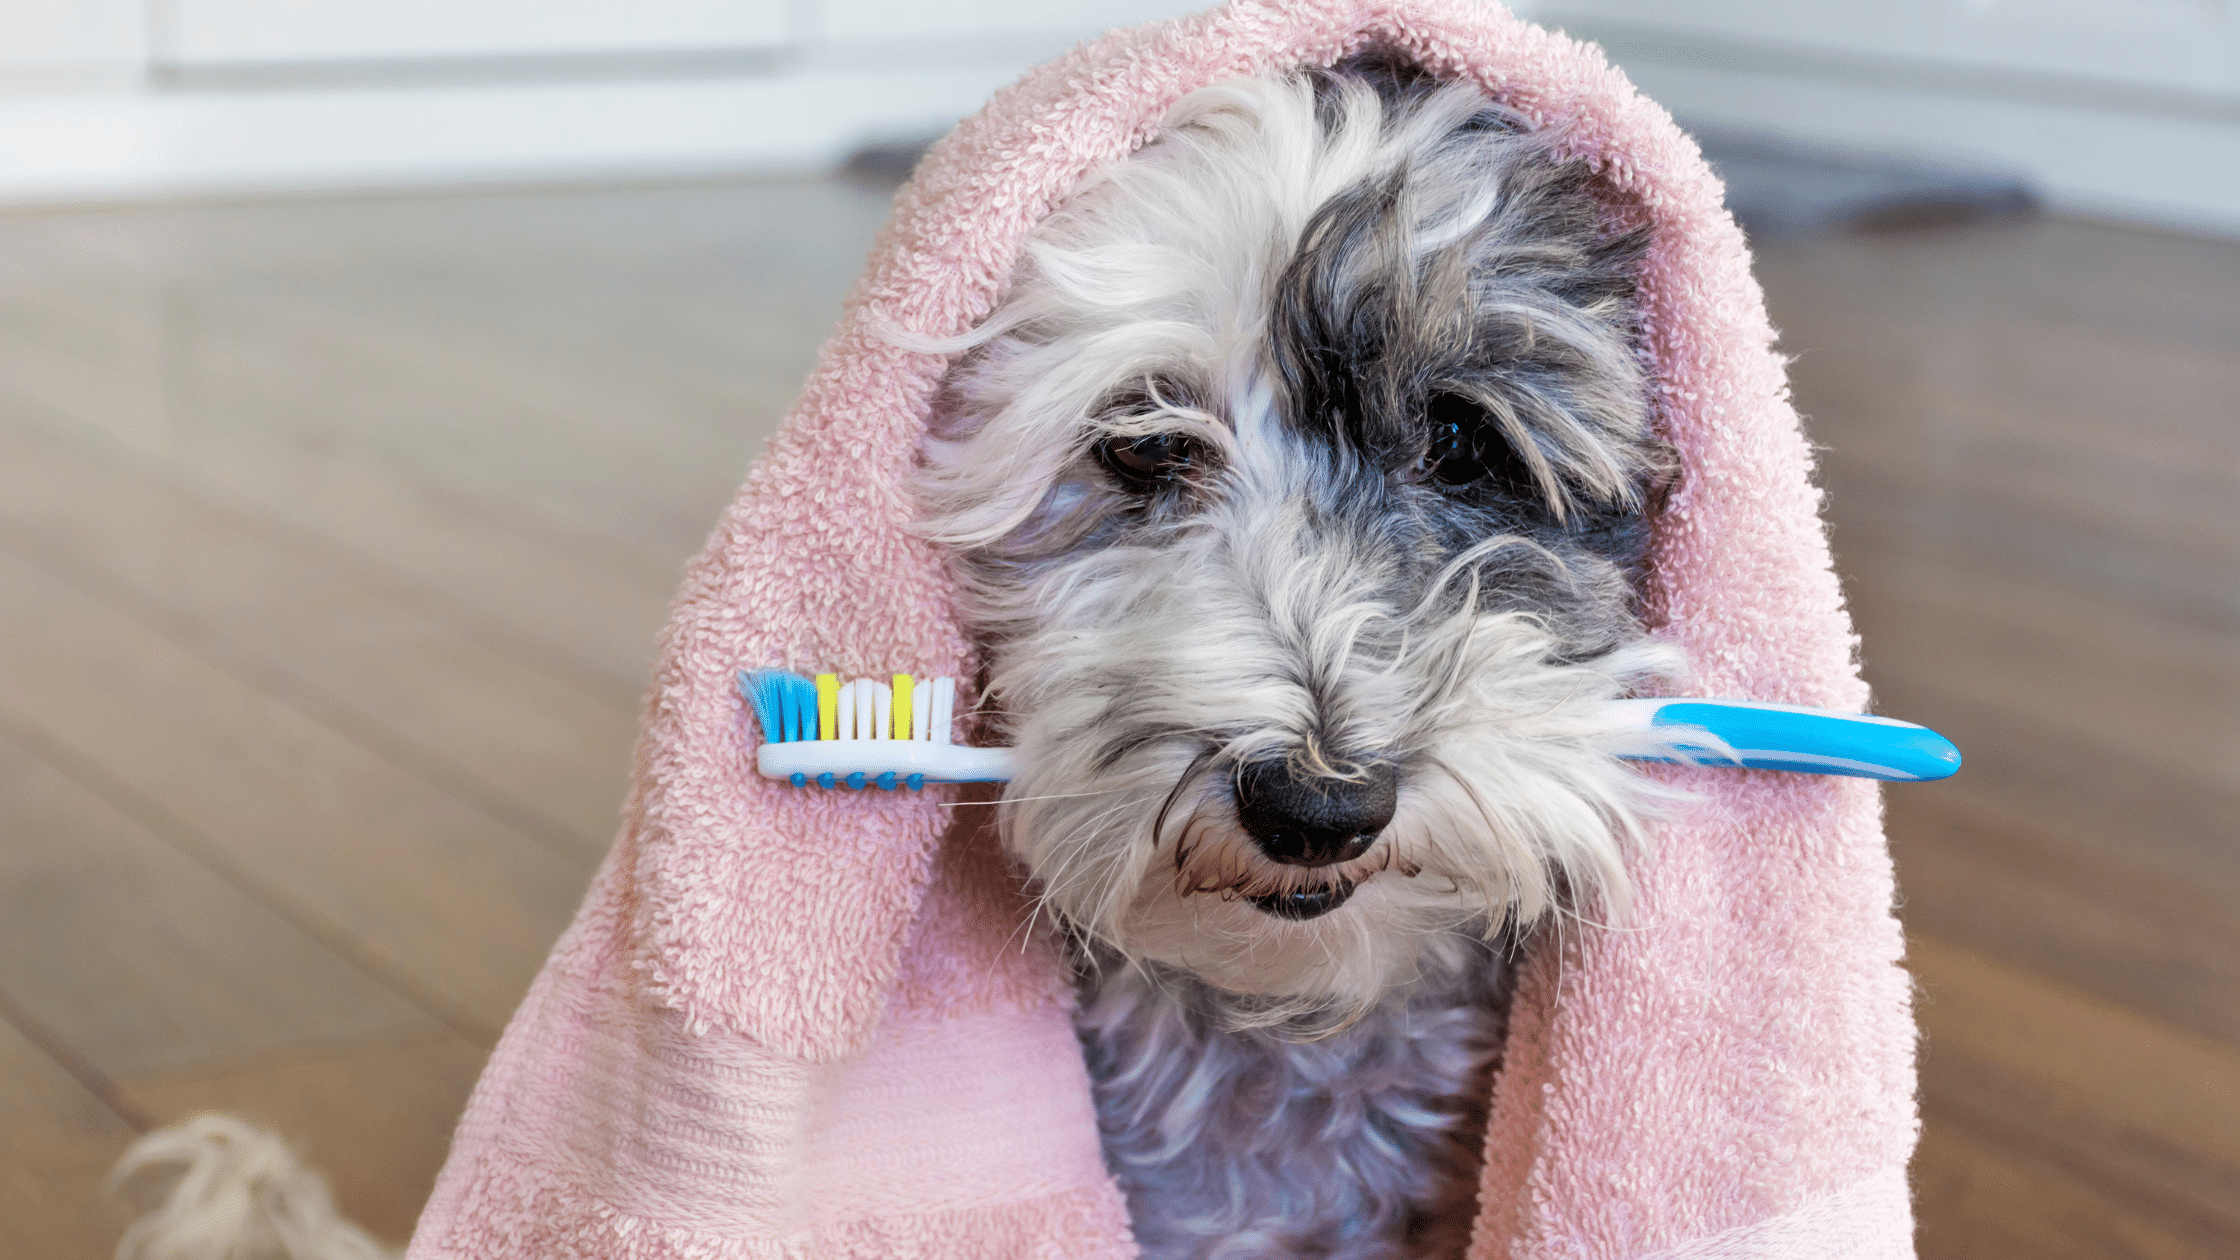 A cute poodle with a toothbrush; dog dental diseases